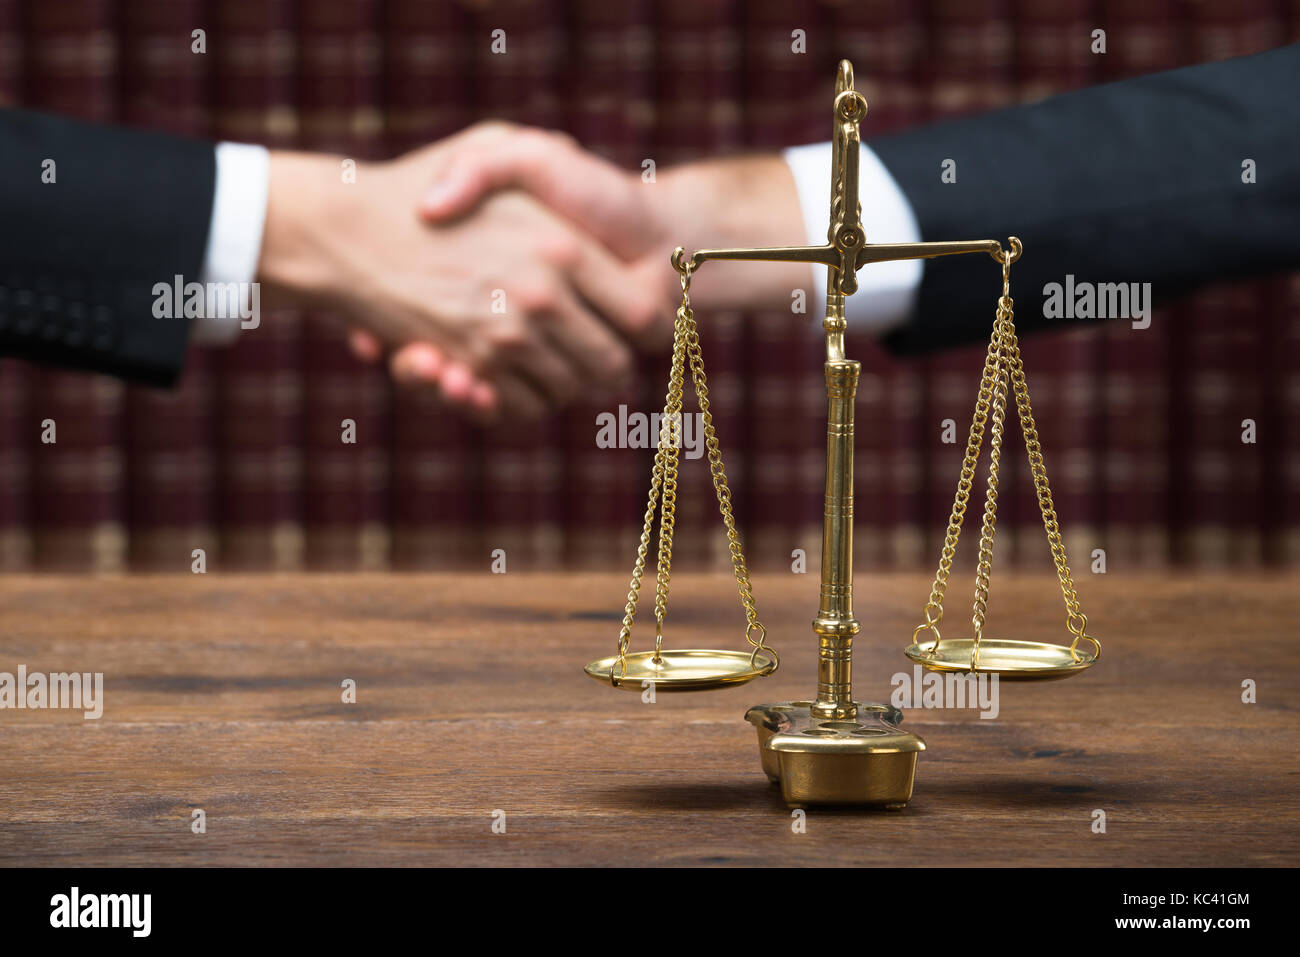 Justice scale on wooden table with judge and client shaking hands in background at courtroom Stock Photo